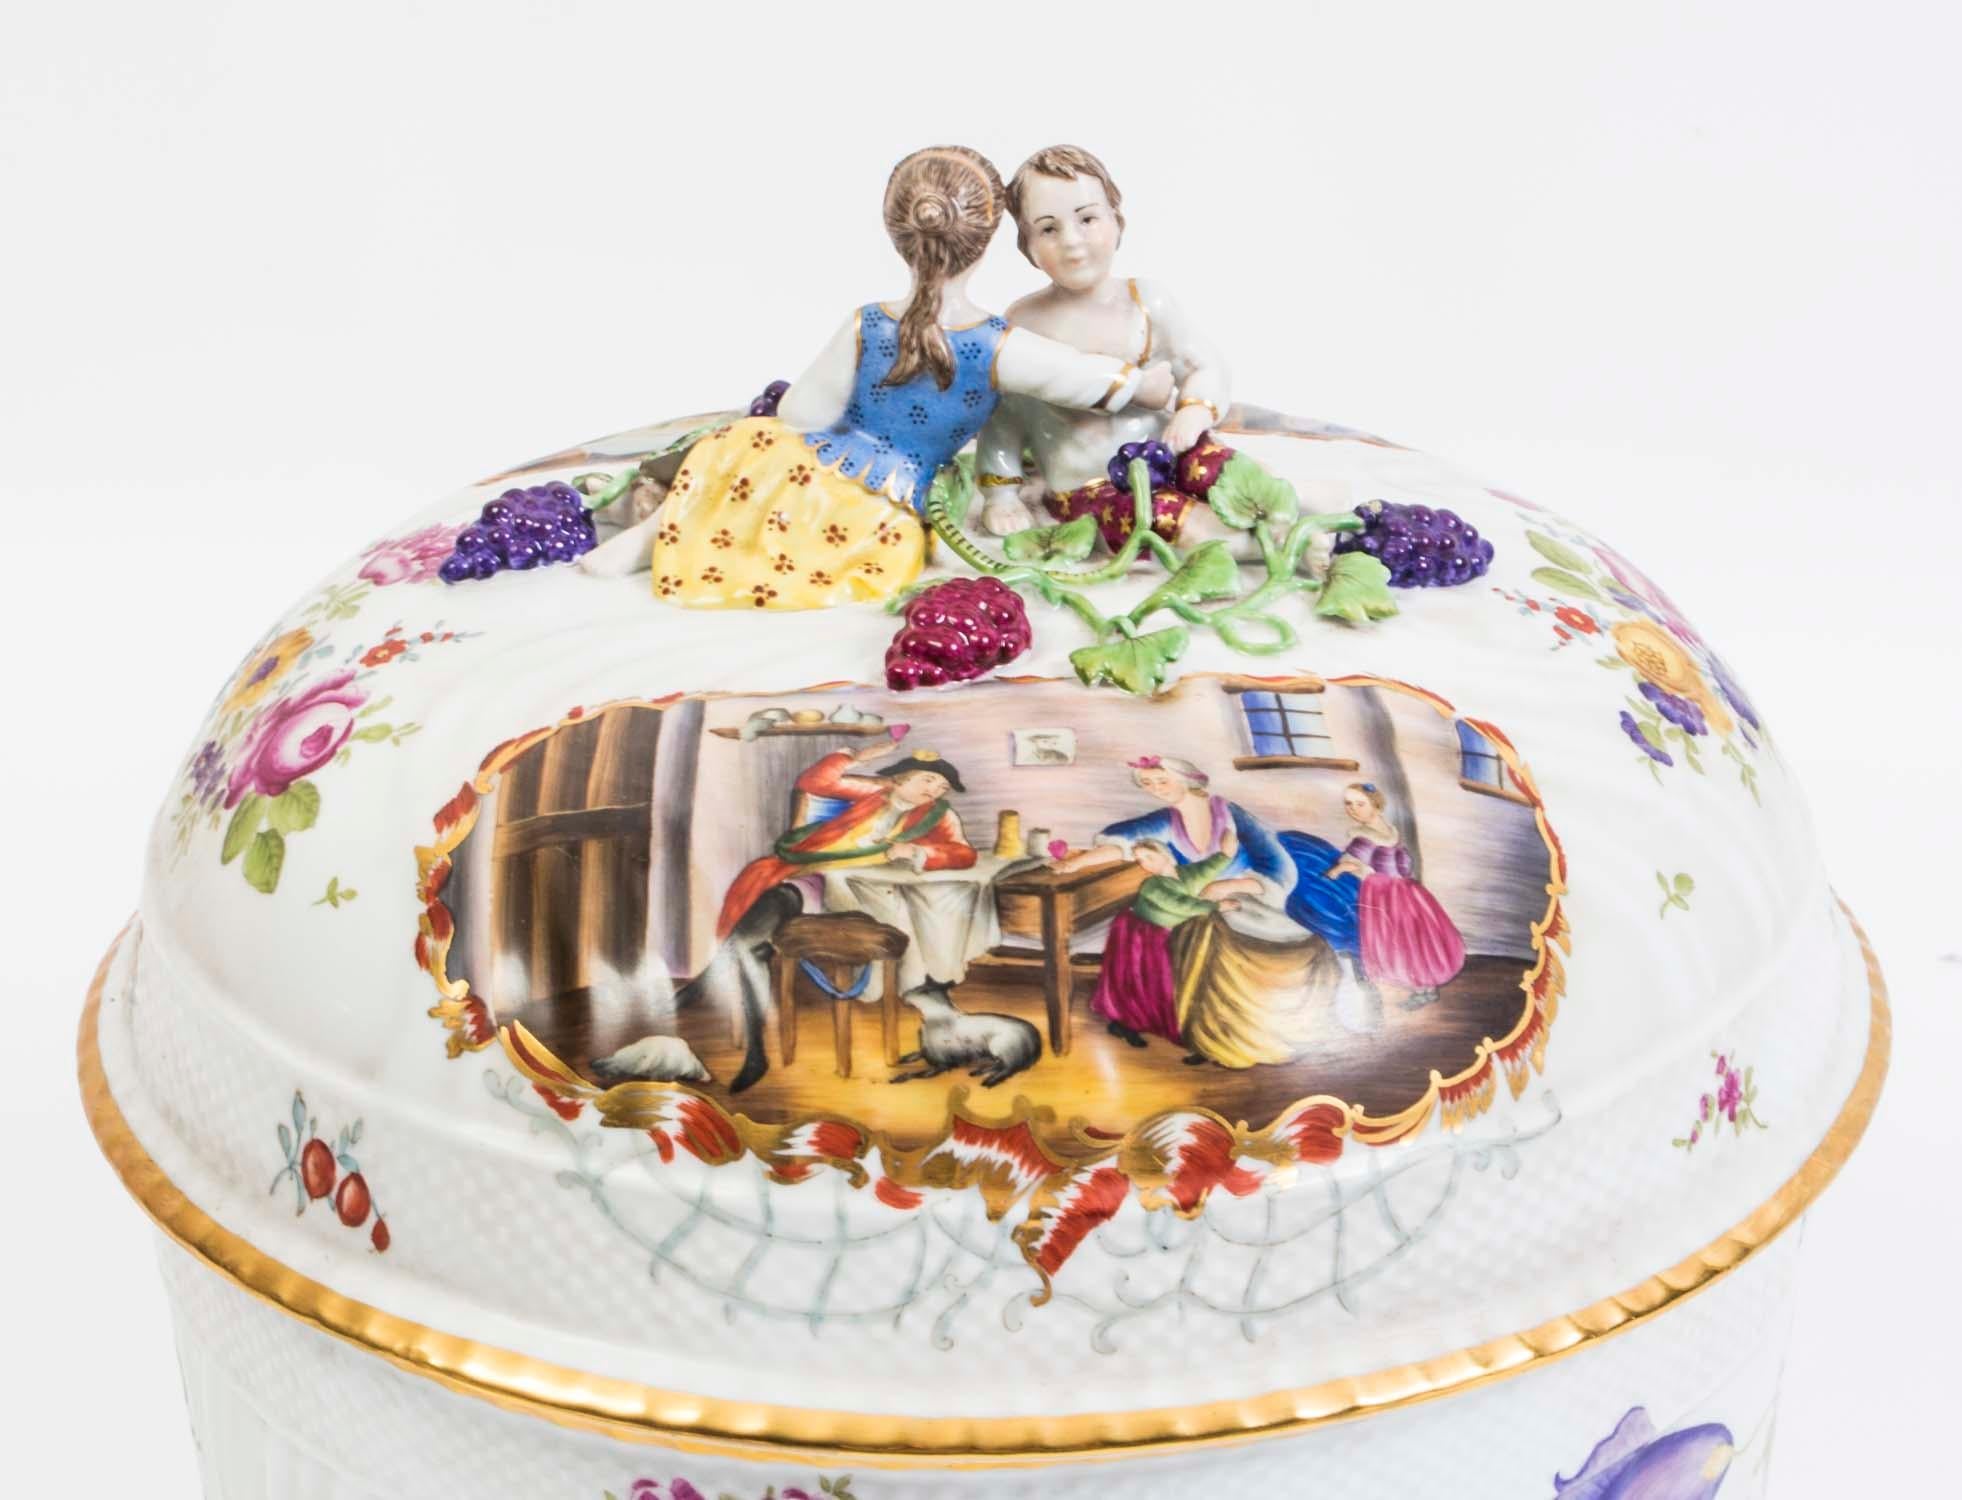 This is a delightful porcelain tureen with lid in Dresden style, dating from the last quarter of the 20th century.

Hand painted with classical scenes in an array of bright colors and beautiful figurines of a couple on the top.

This is a lovely